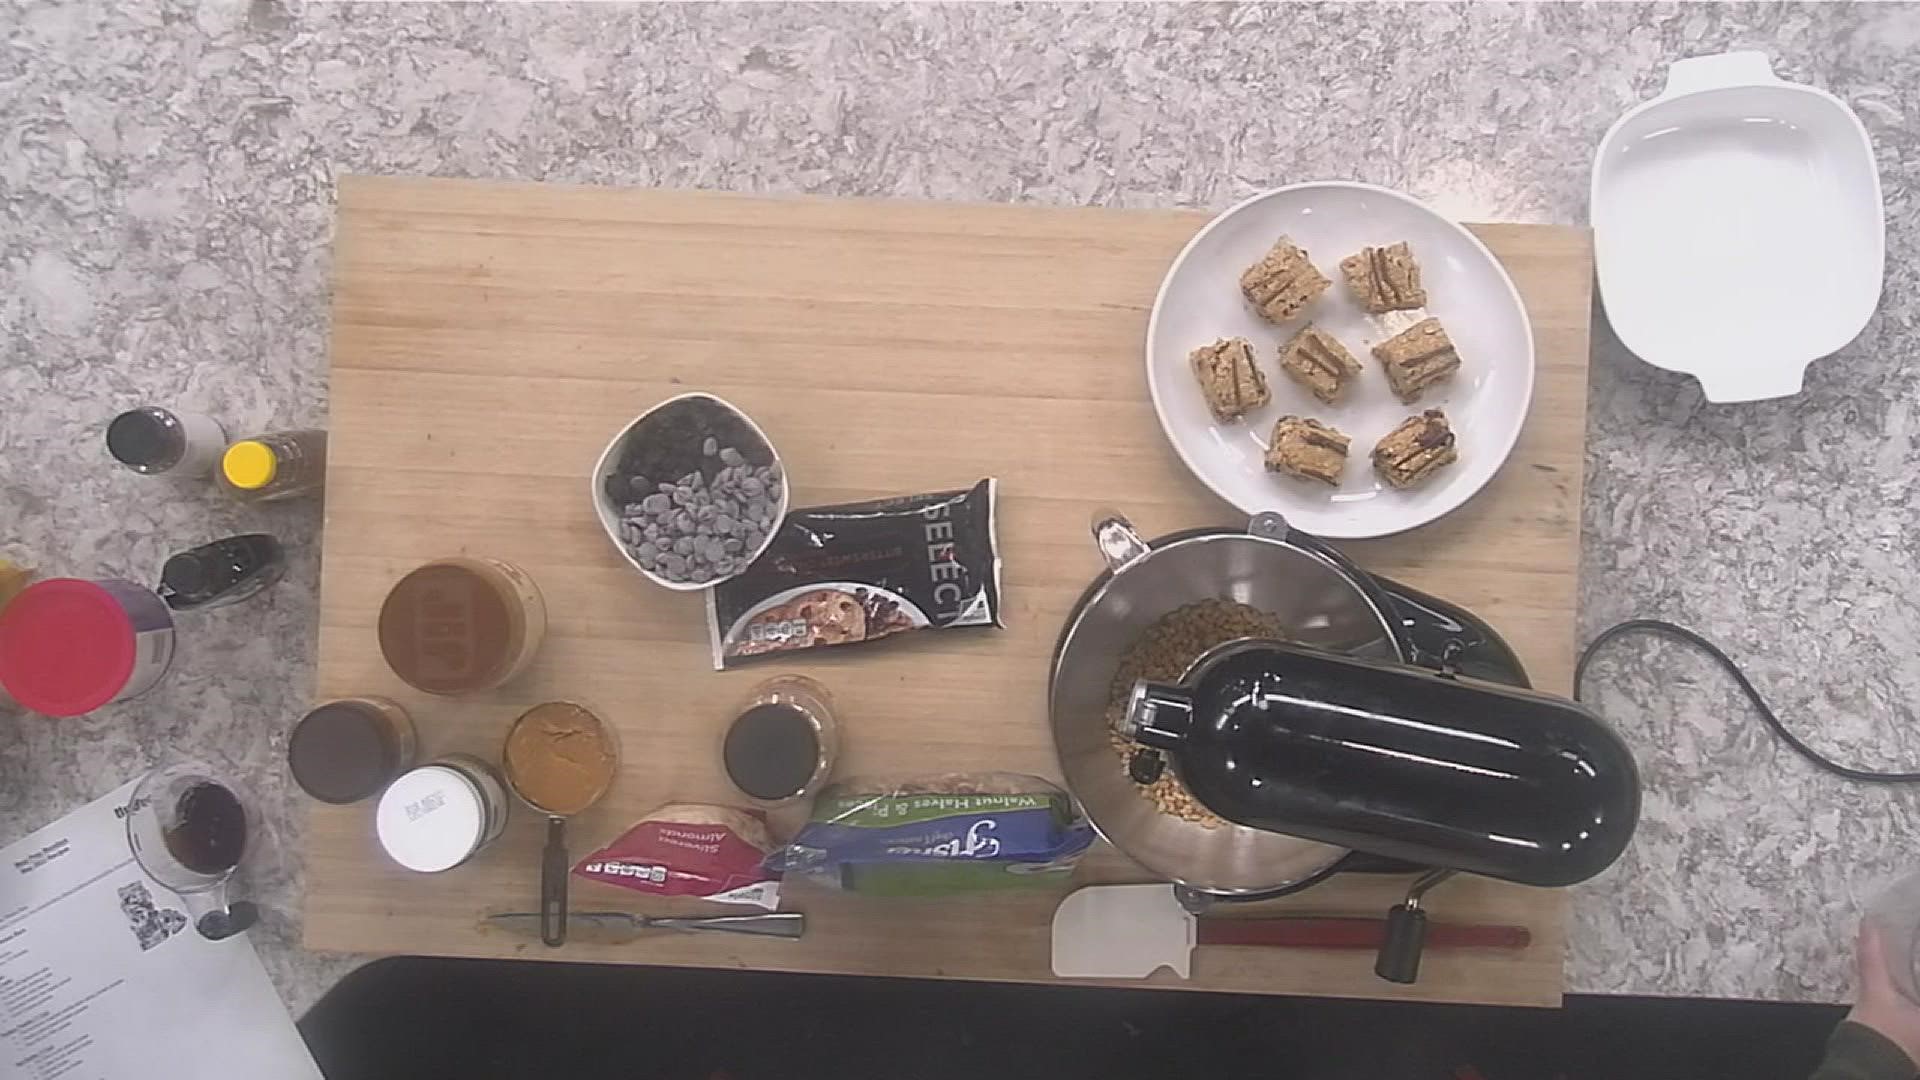 Build your own protein bars from a wide range of ingredients.